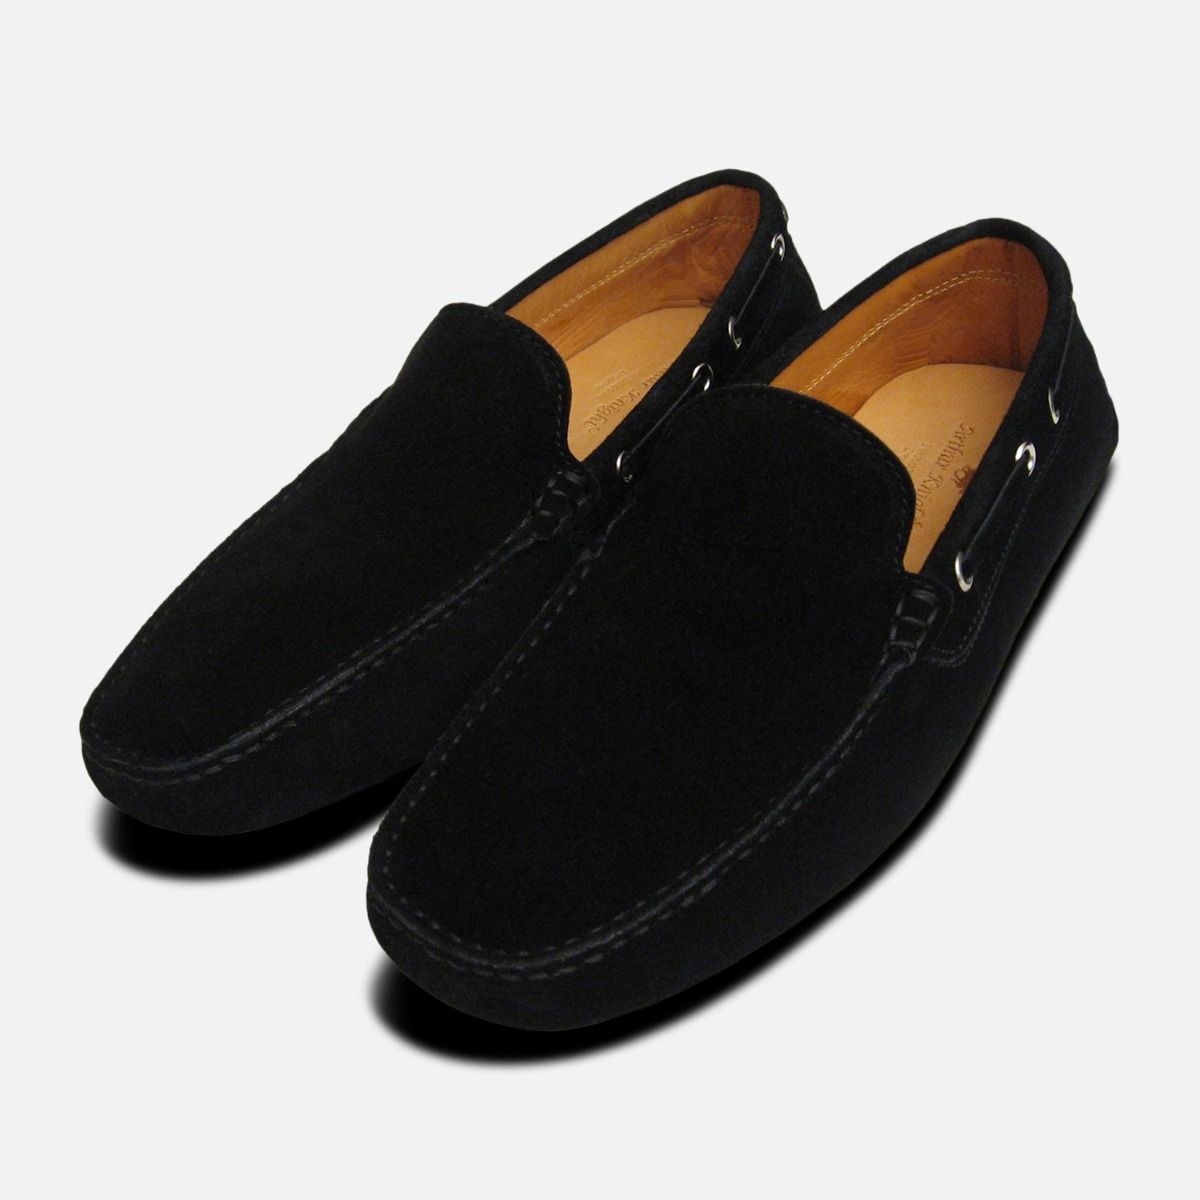 mens driving moccasins official store 